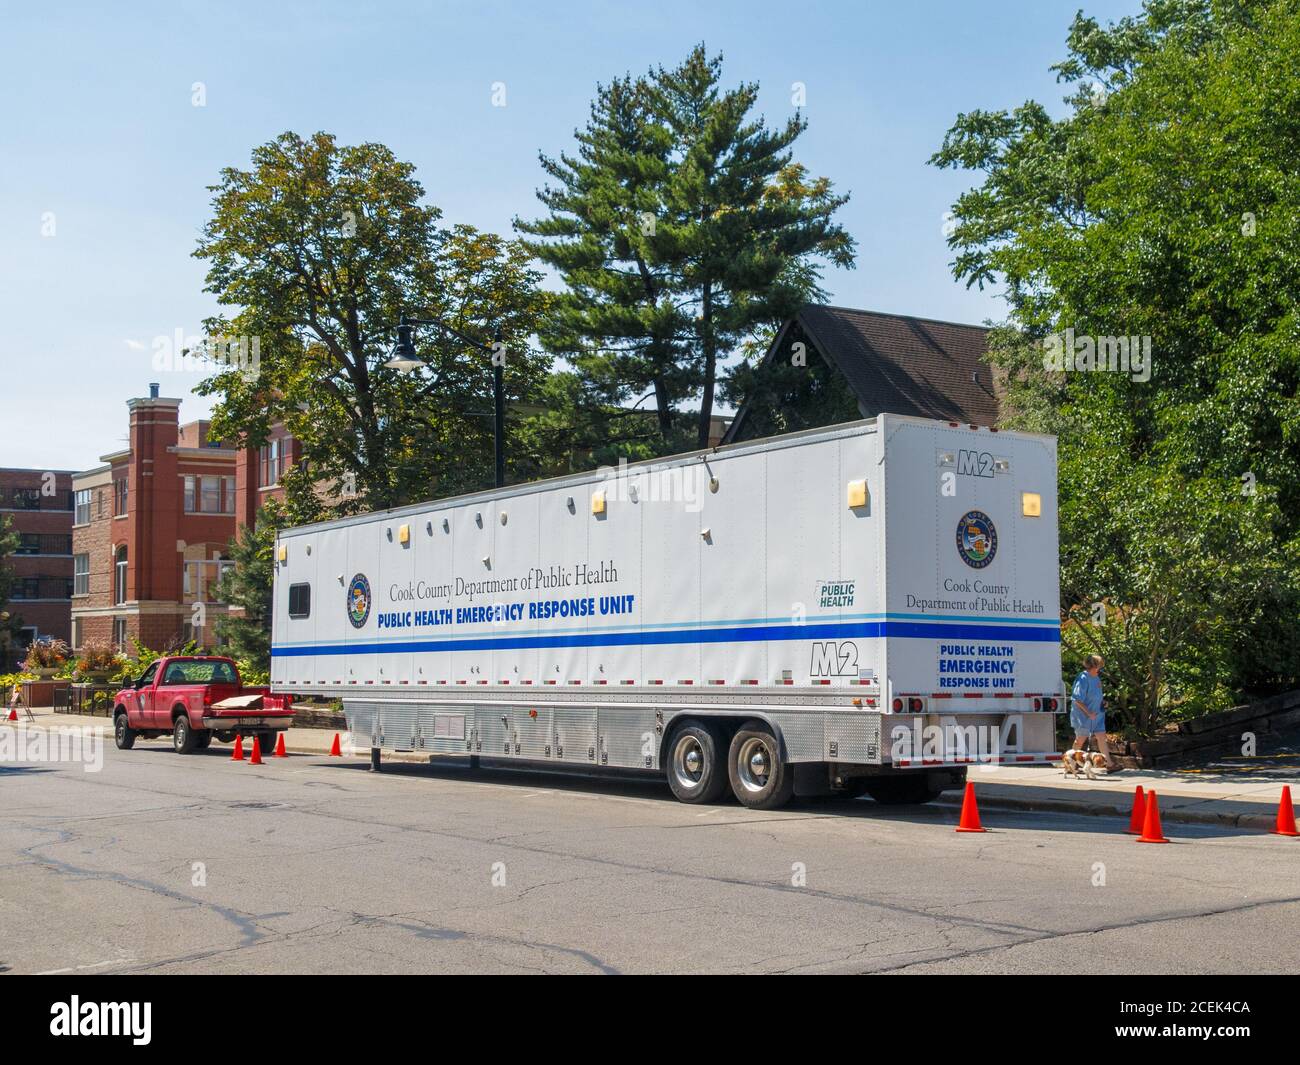 Cook County Department of Public Health Emergency Response Unit. Stockfoto